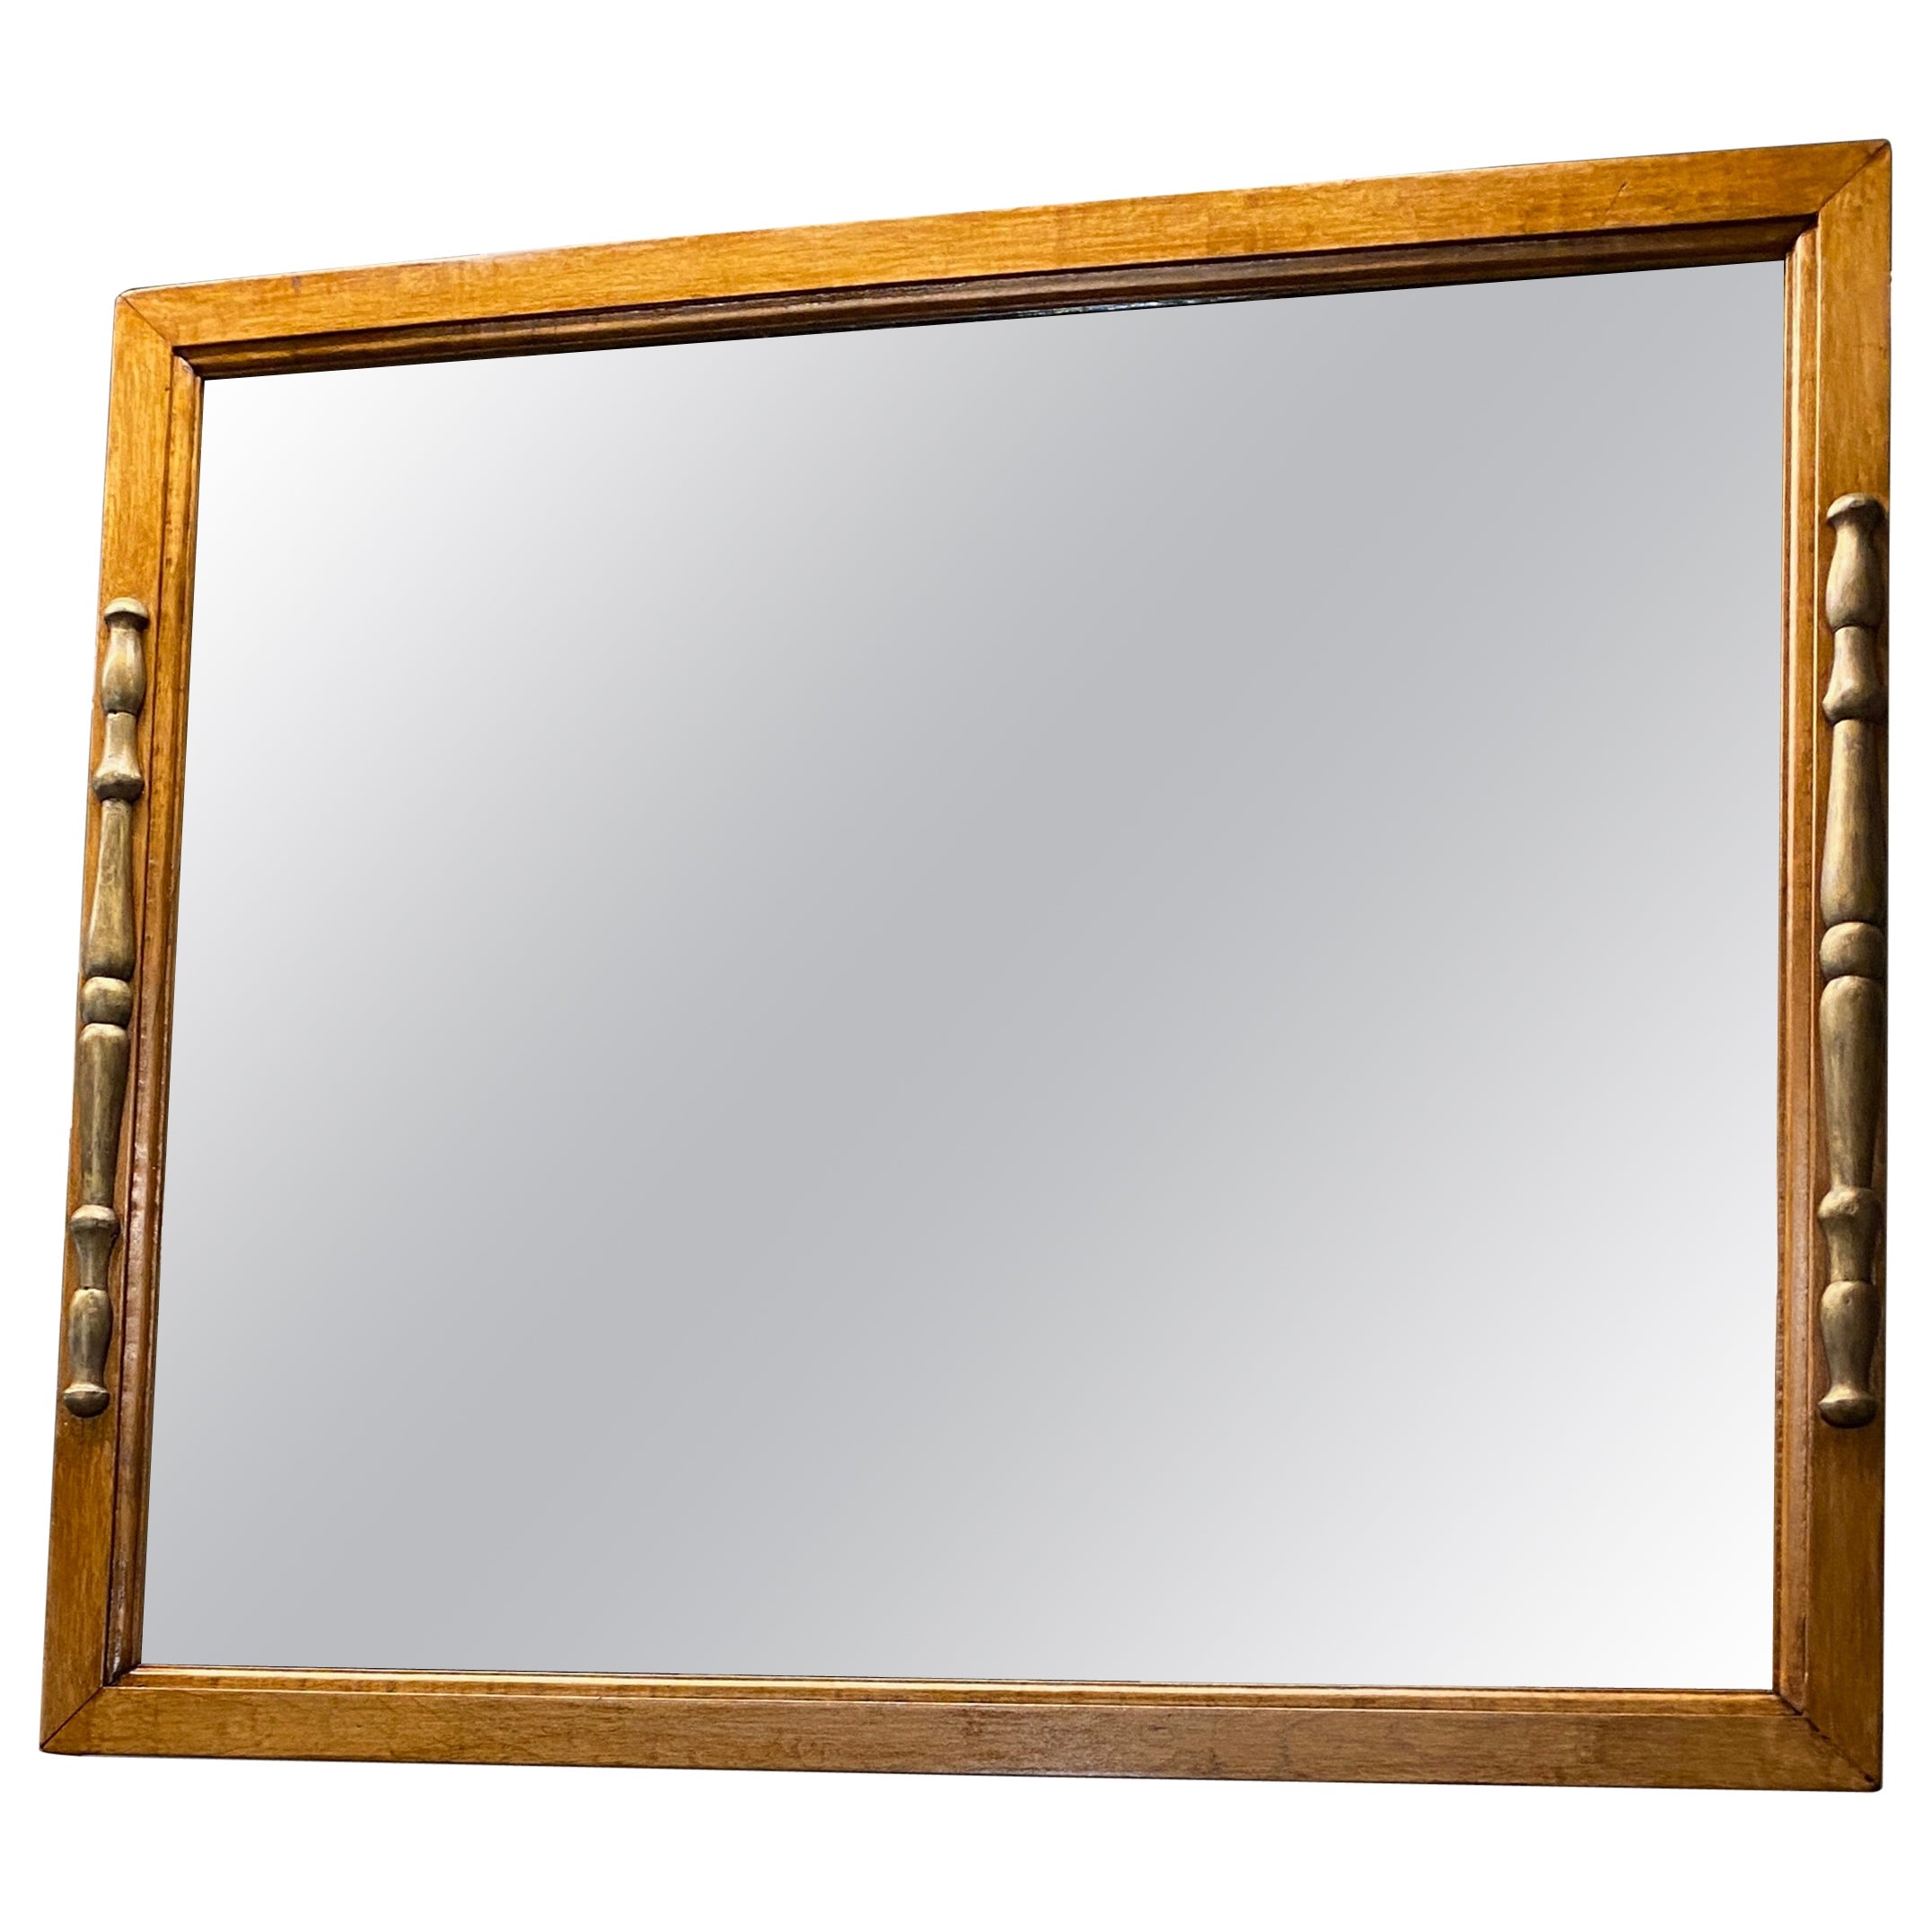 Mirror Horizontal or Vertical with side decoration